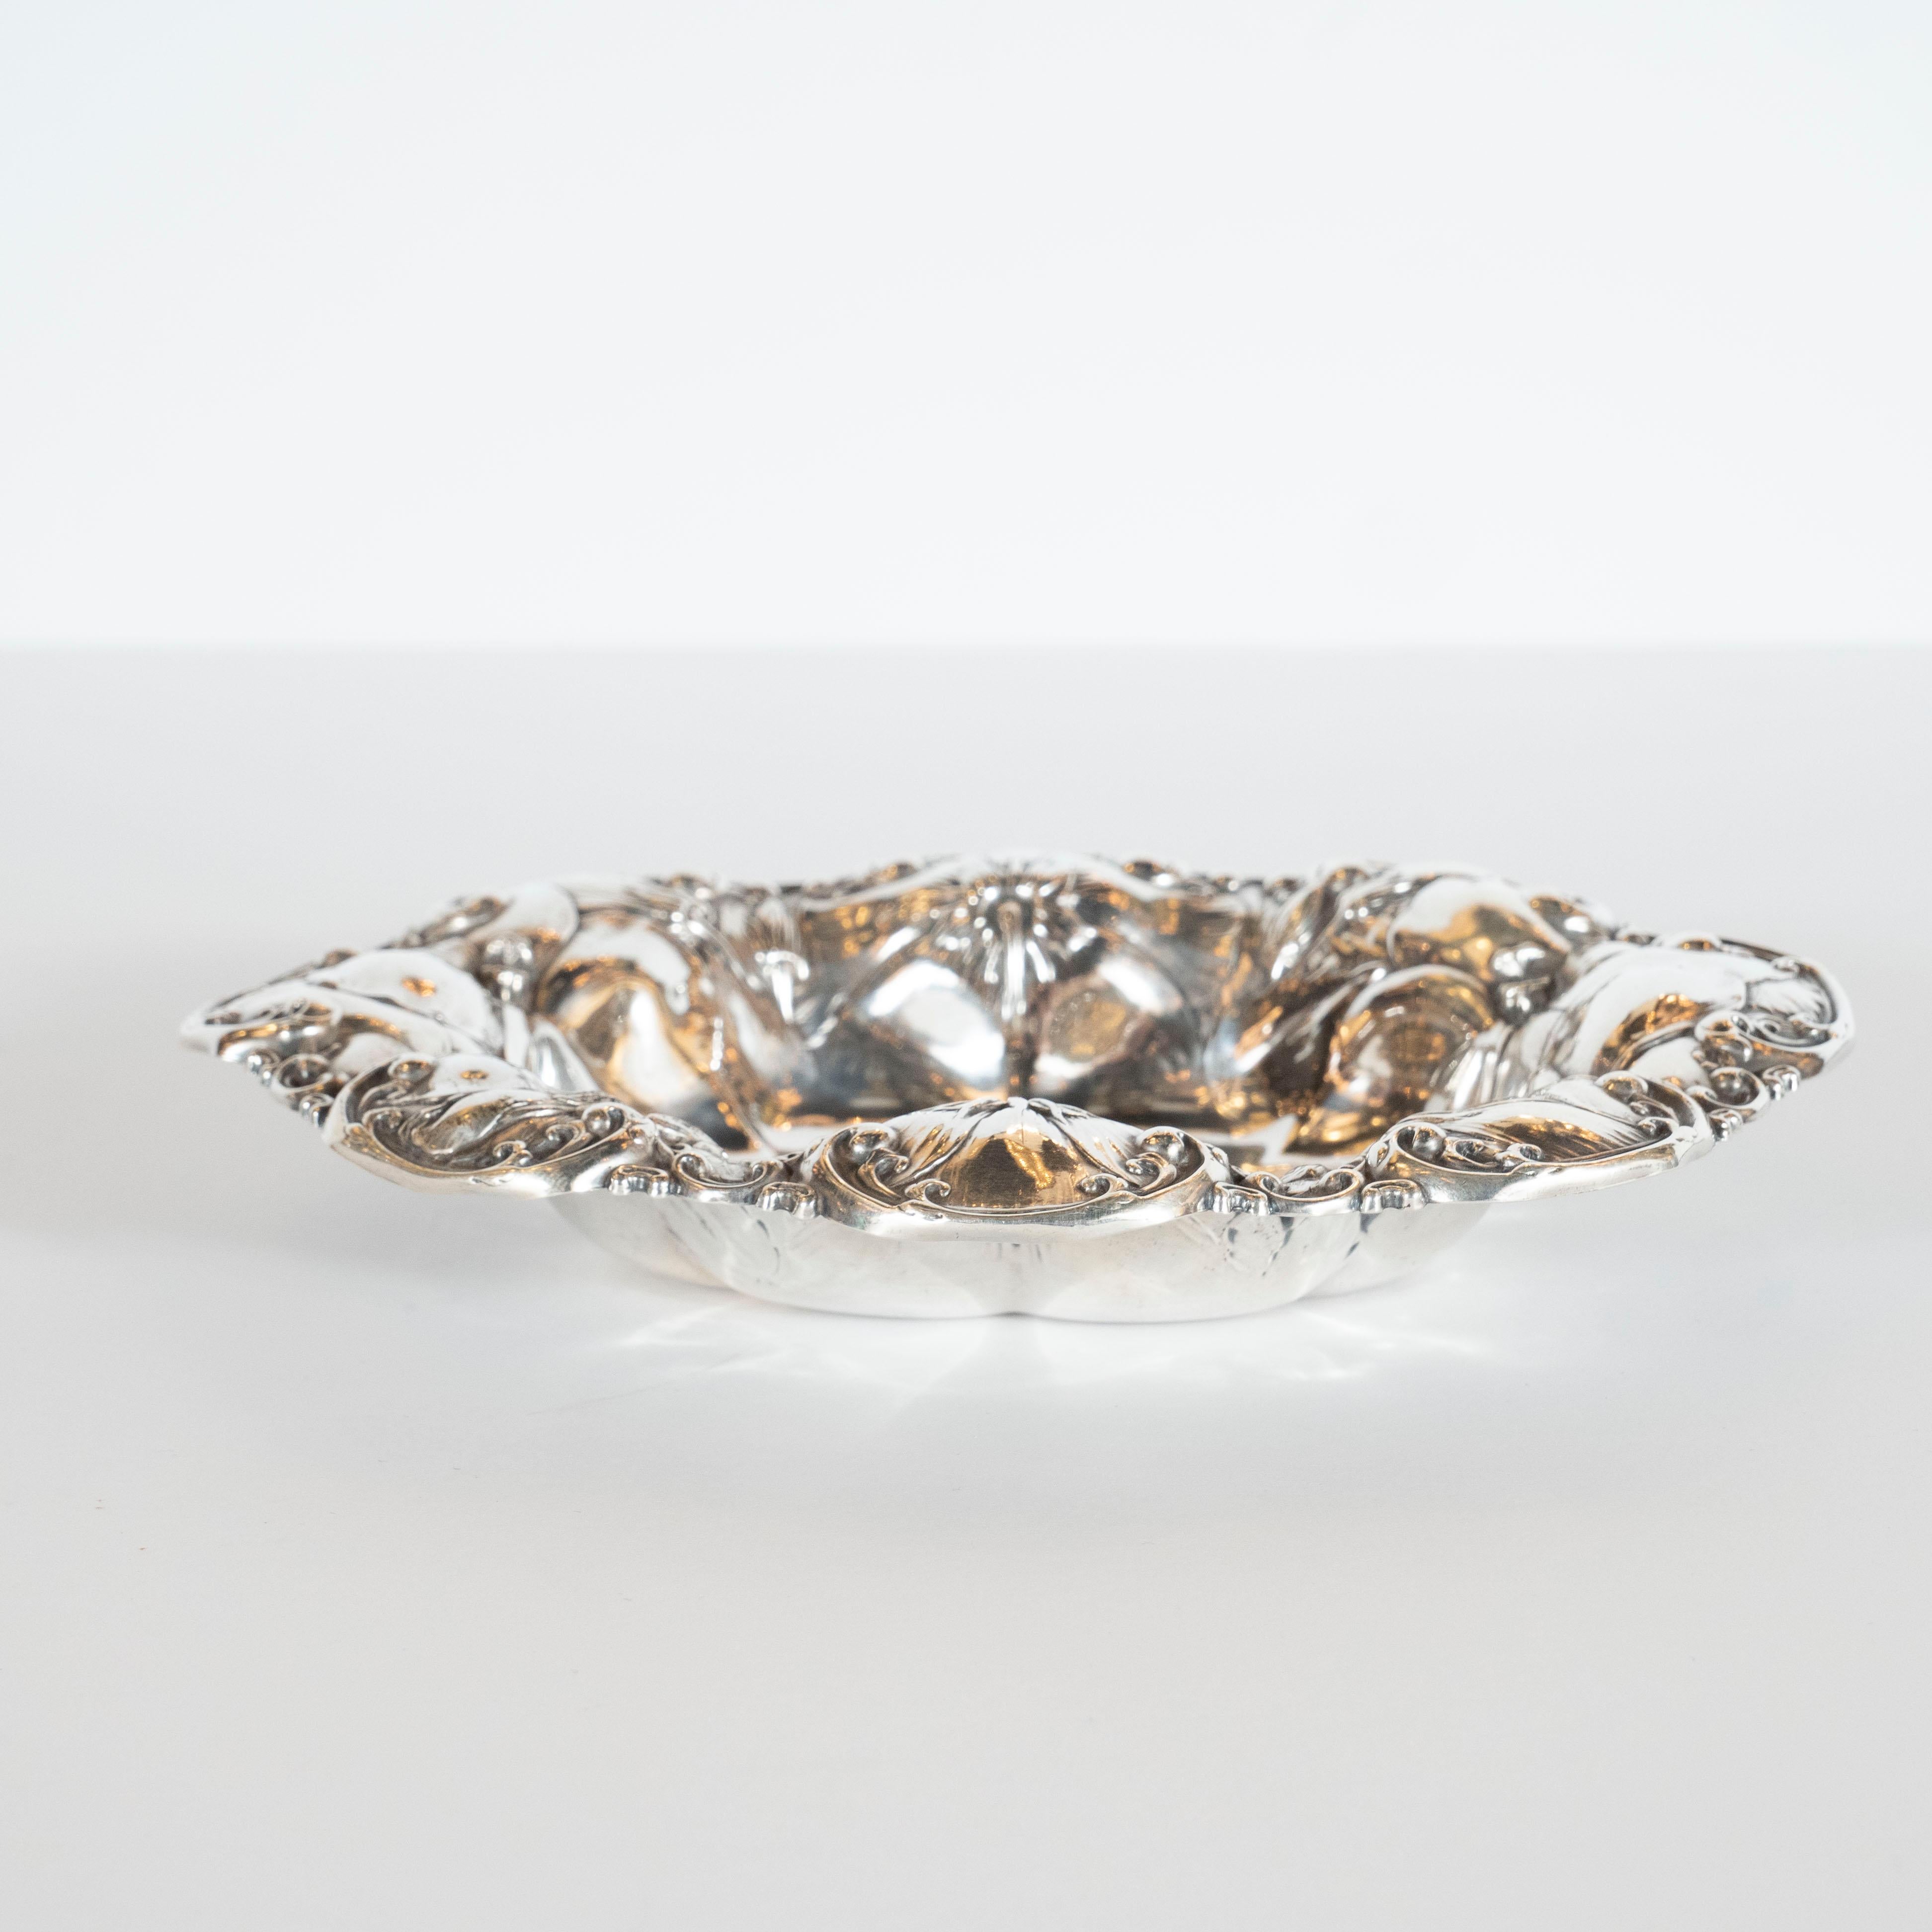 Early 20th Century Antique Sterling Silver Art Nouveau Decorative Bowl with Morning Glory Motif For Sale